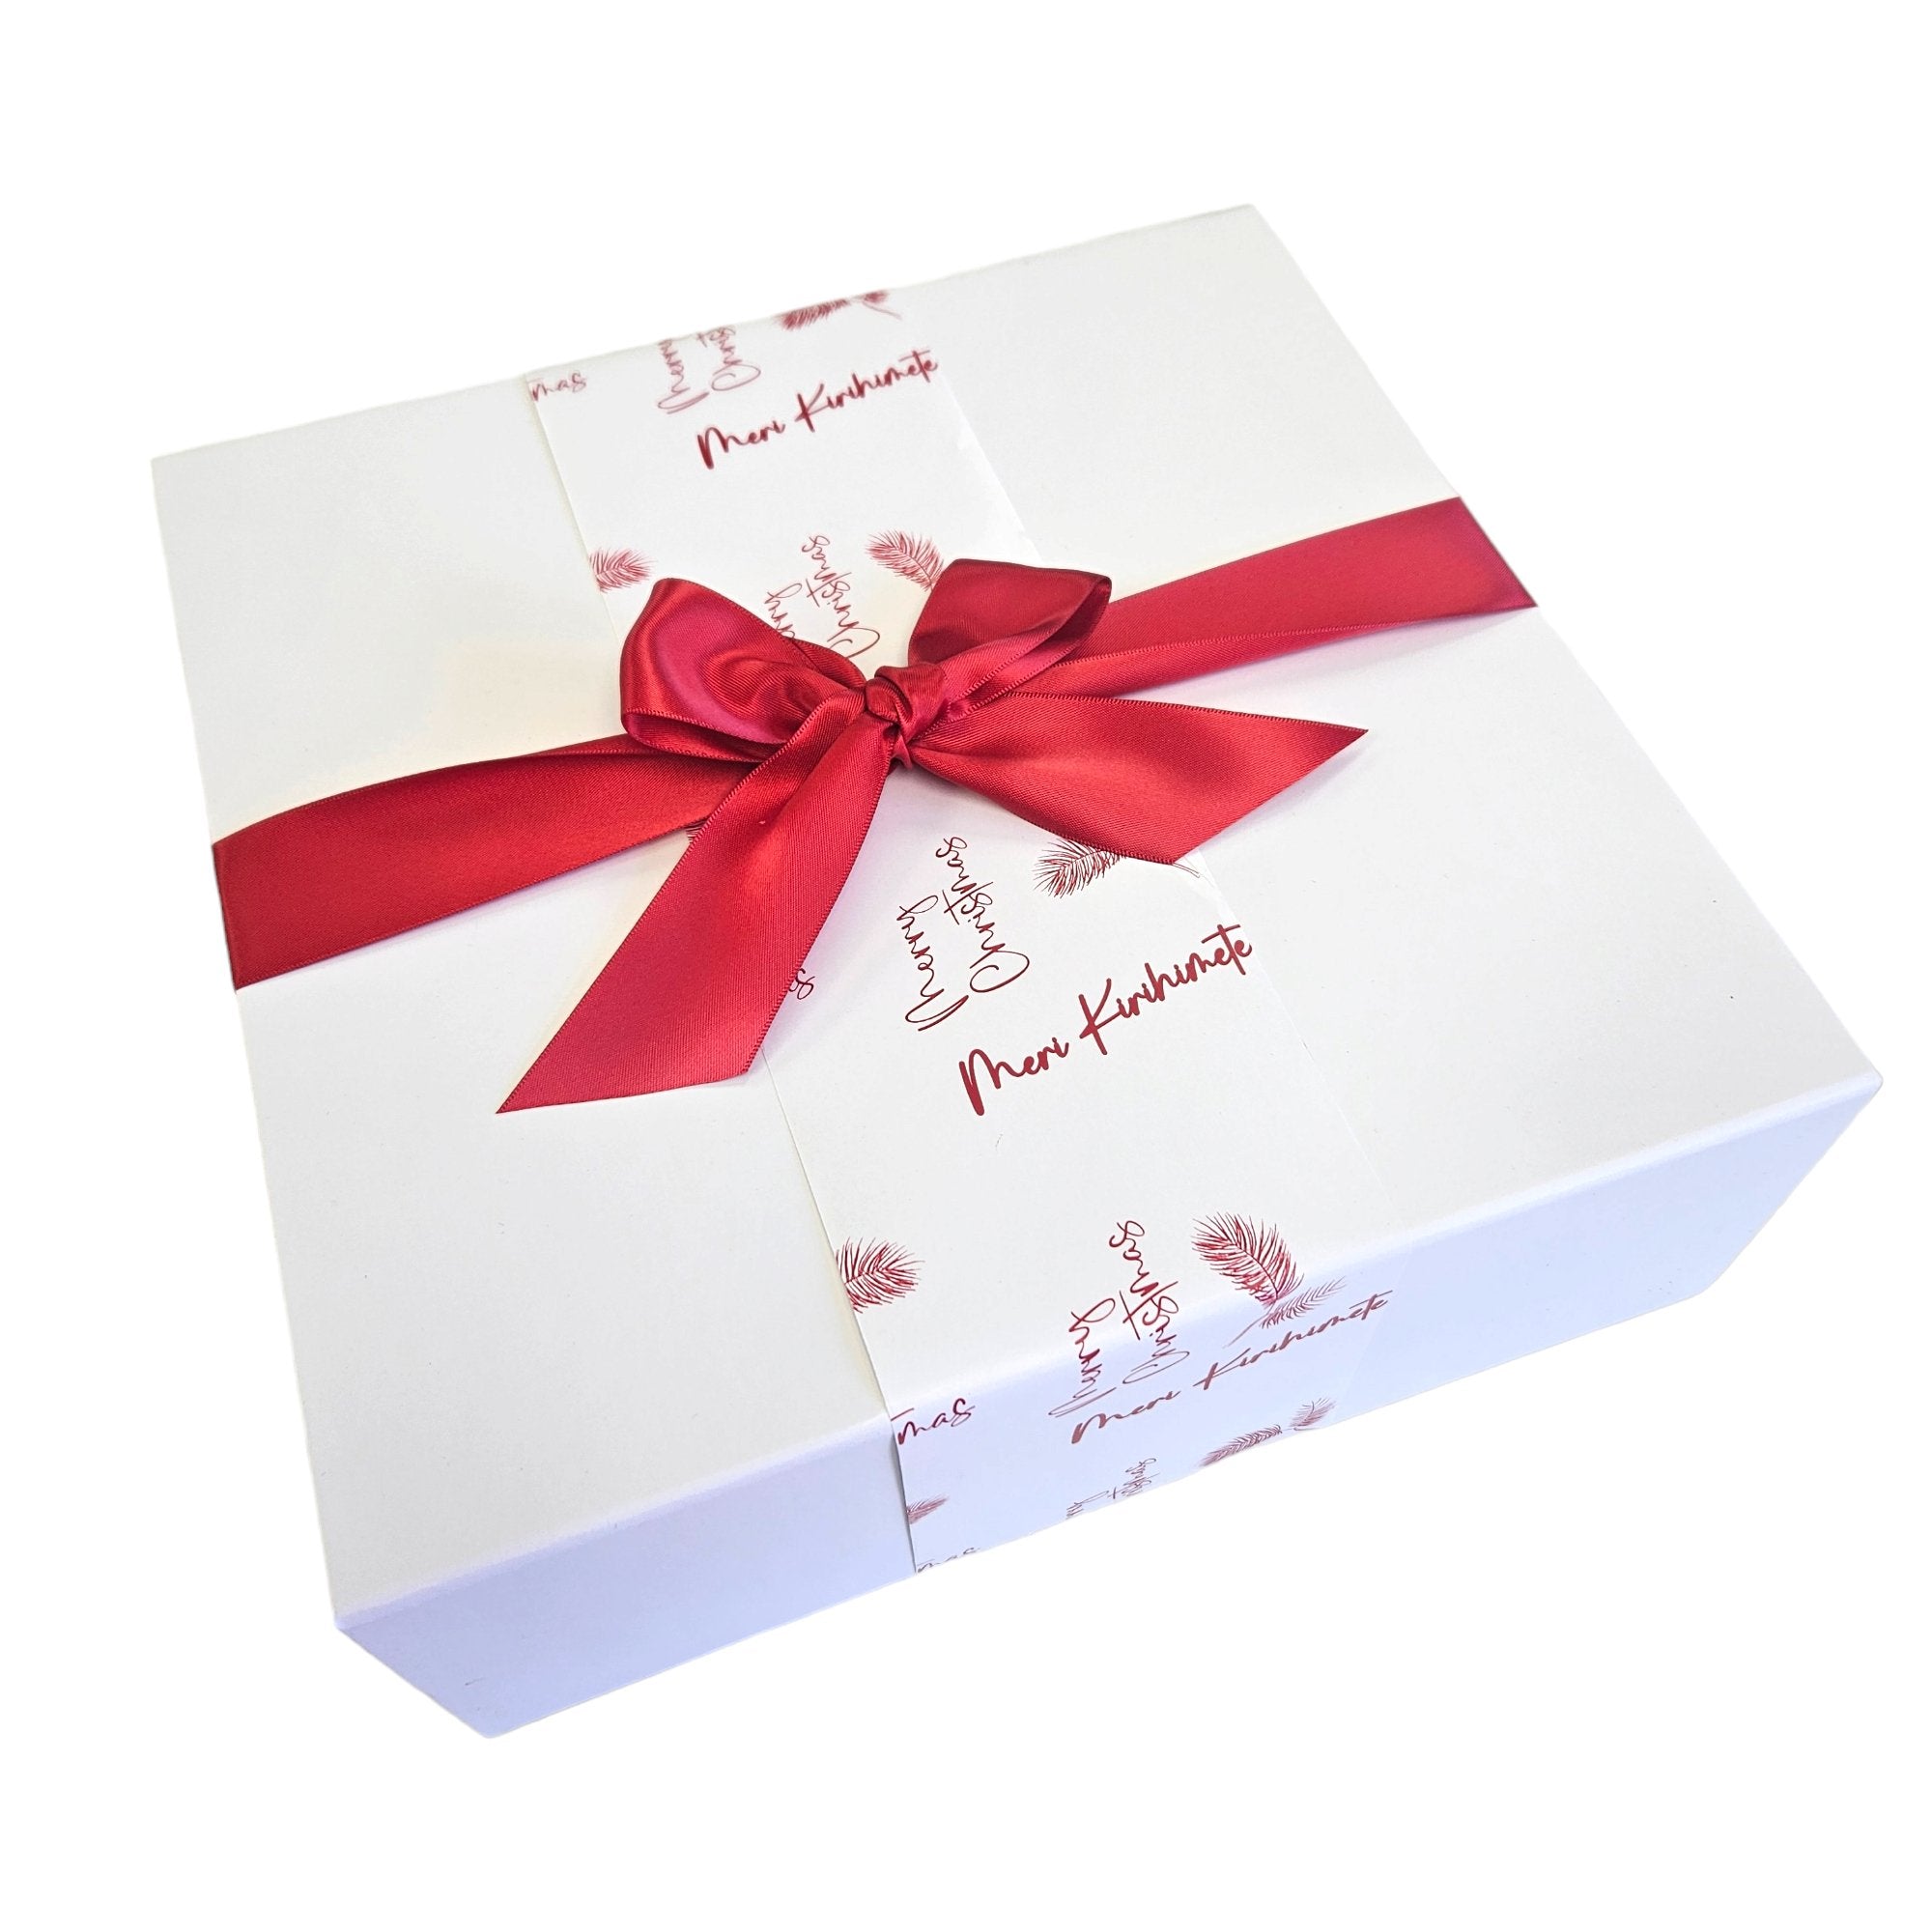 Love in a Box - Beautiful Gifts